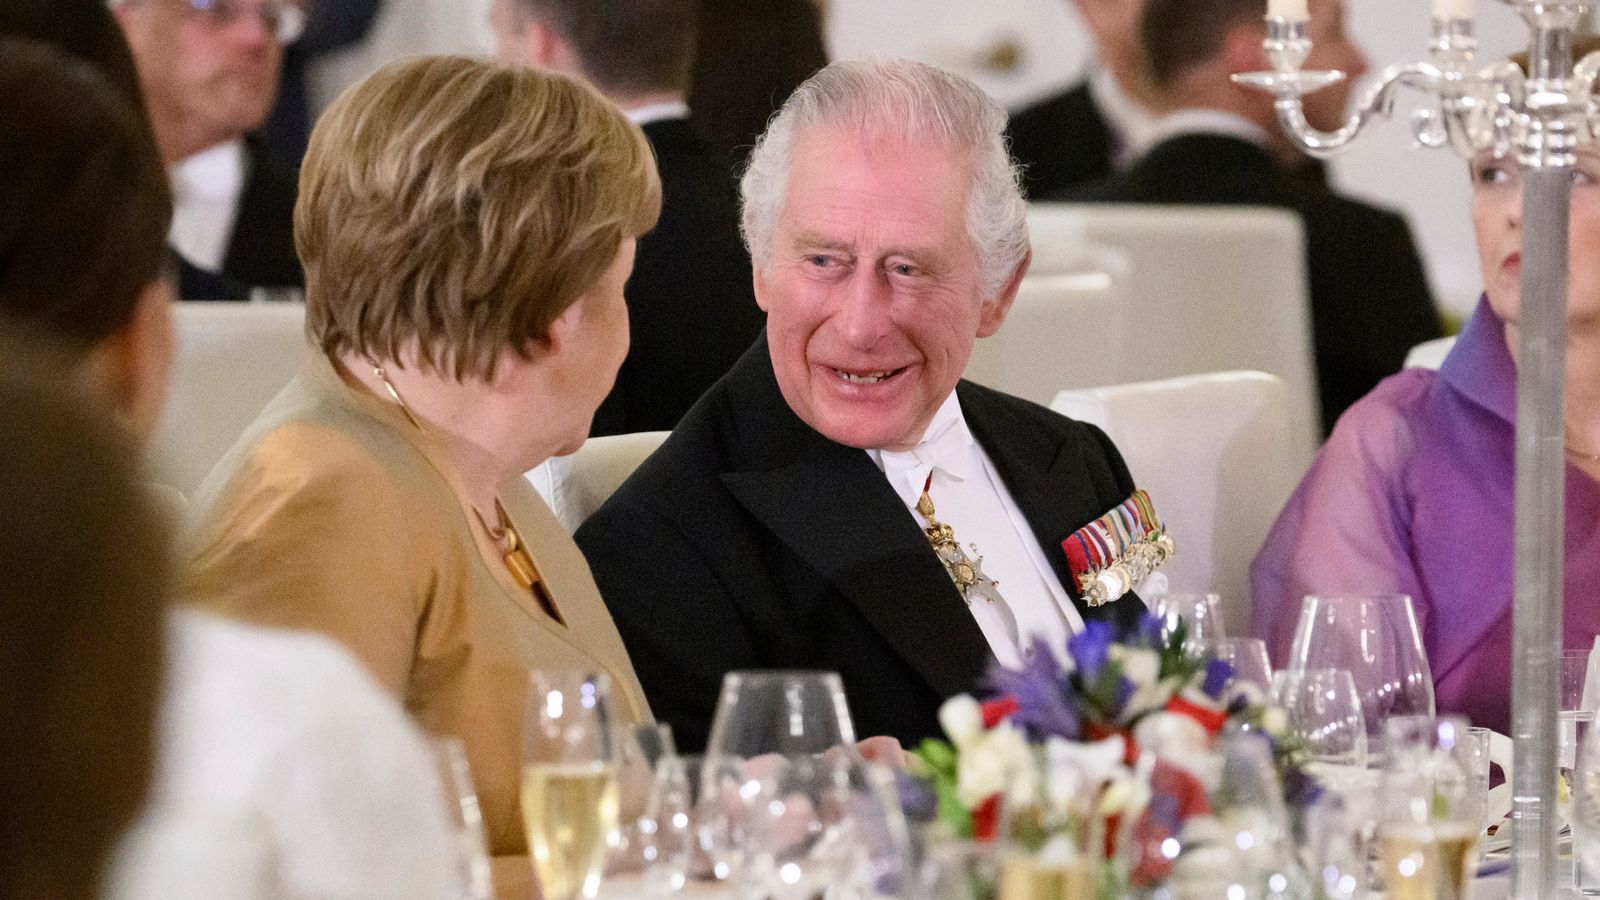 King pledges to 'strengthen connections' between UK and Germany in state banquet speech